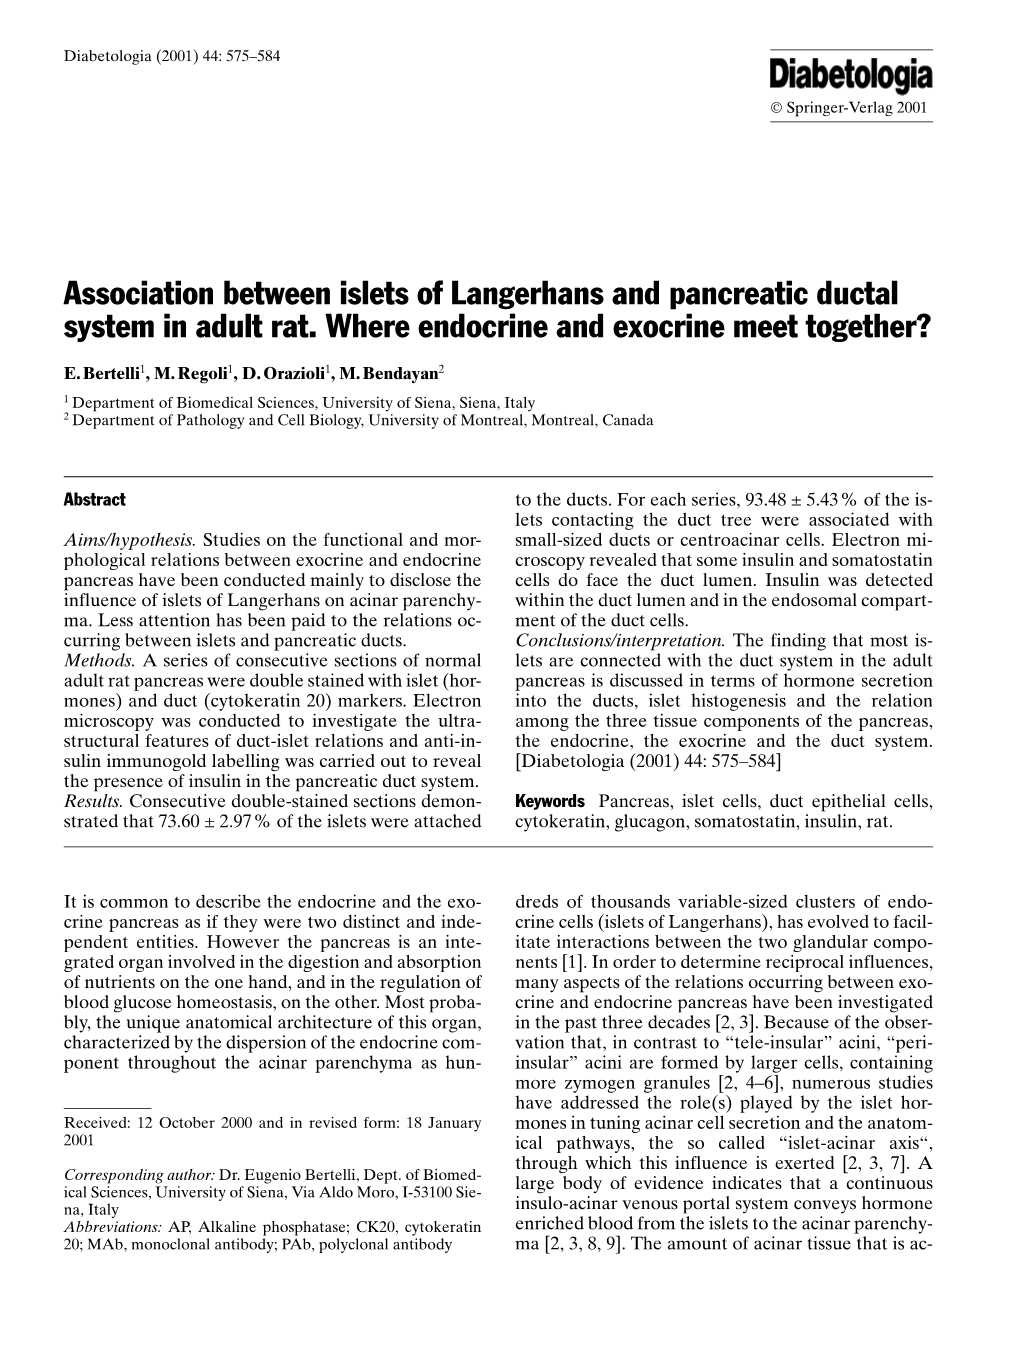 Association Between Islets of Langerhans and Pancreatic Ductal System in Adult Rat